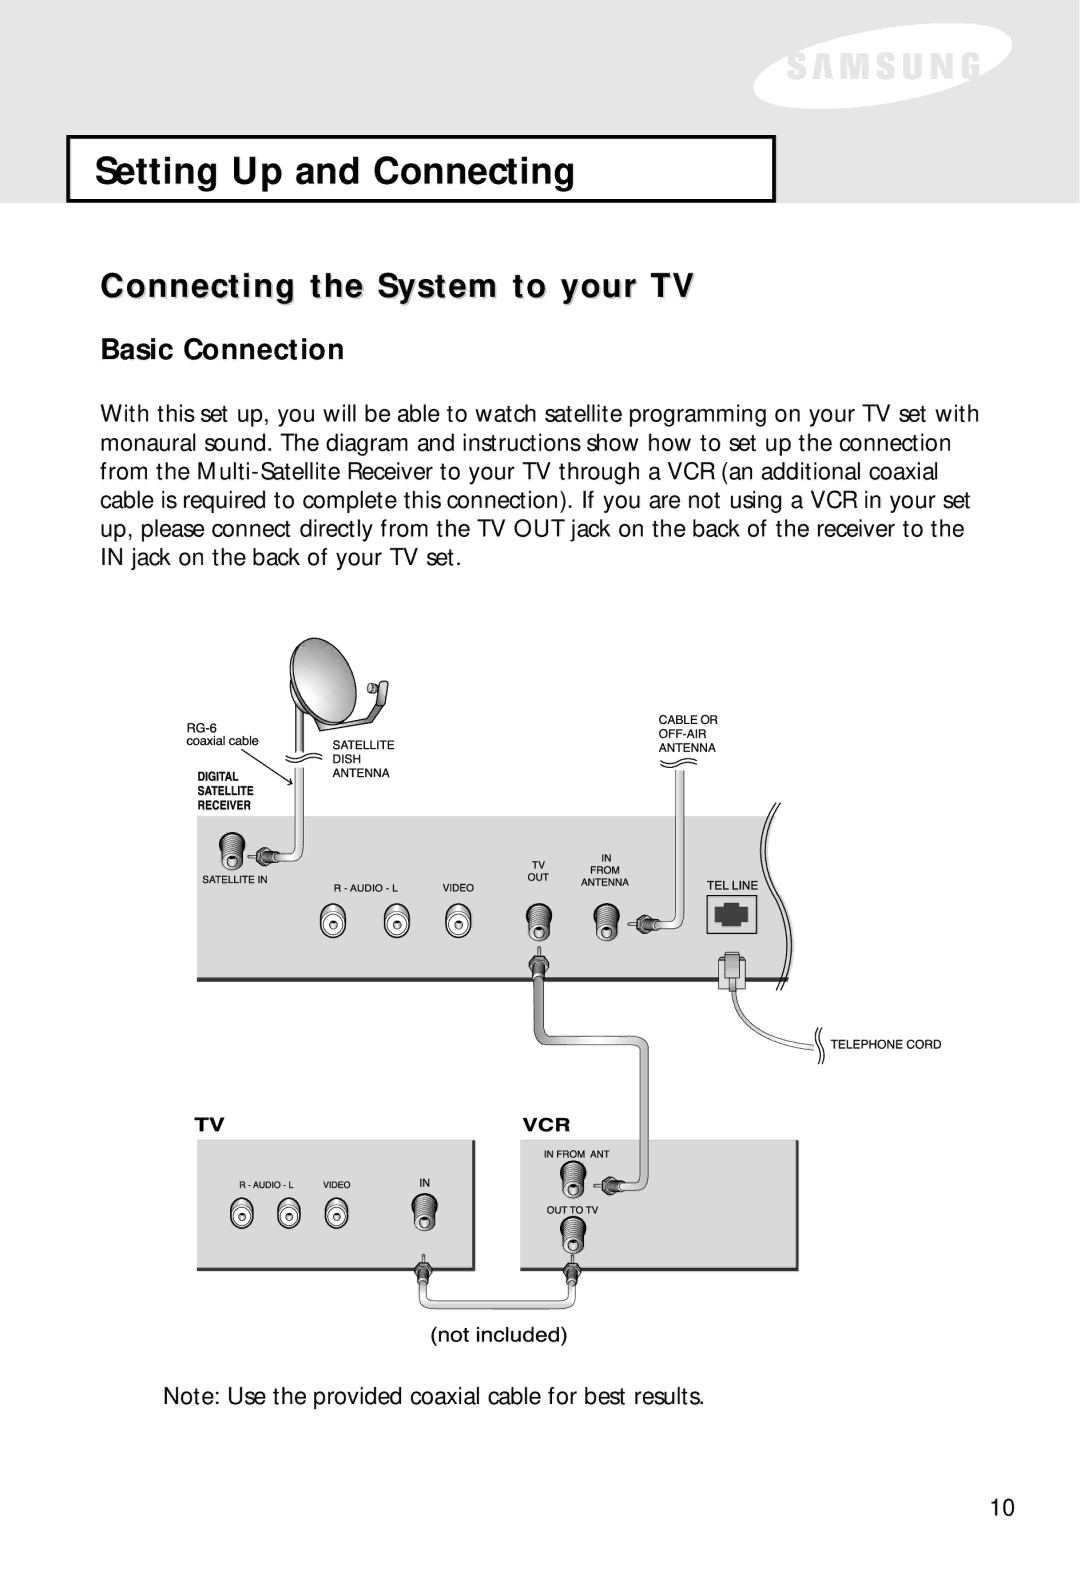 Samsung SIR-S60W owner manual Connecting the System to your TV, Basic Connection 